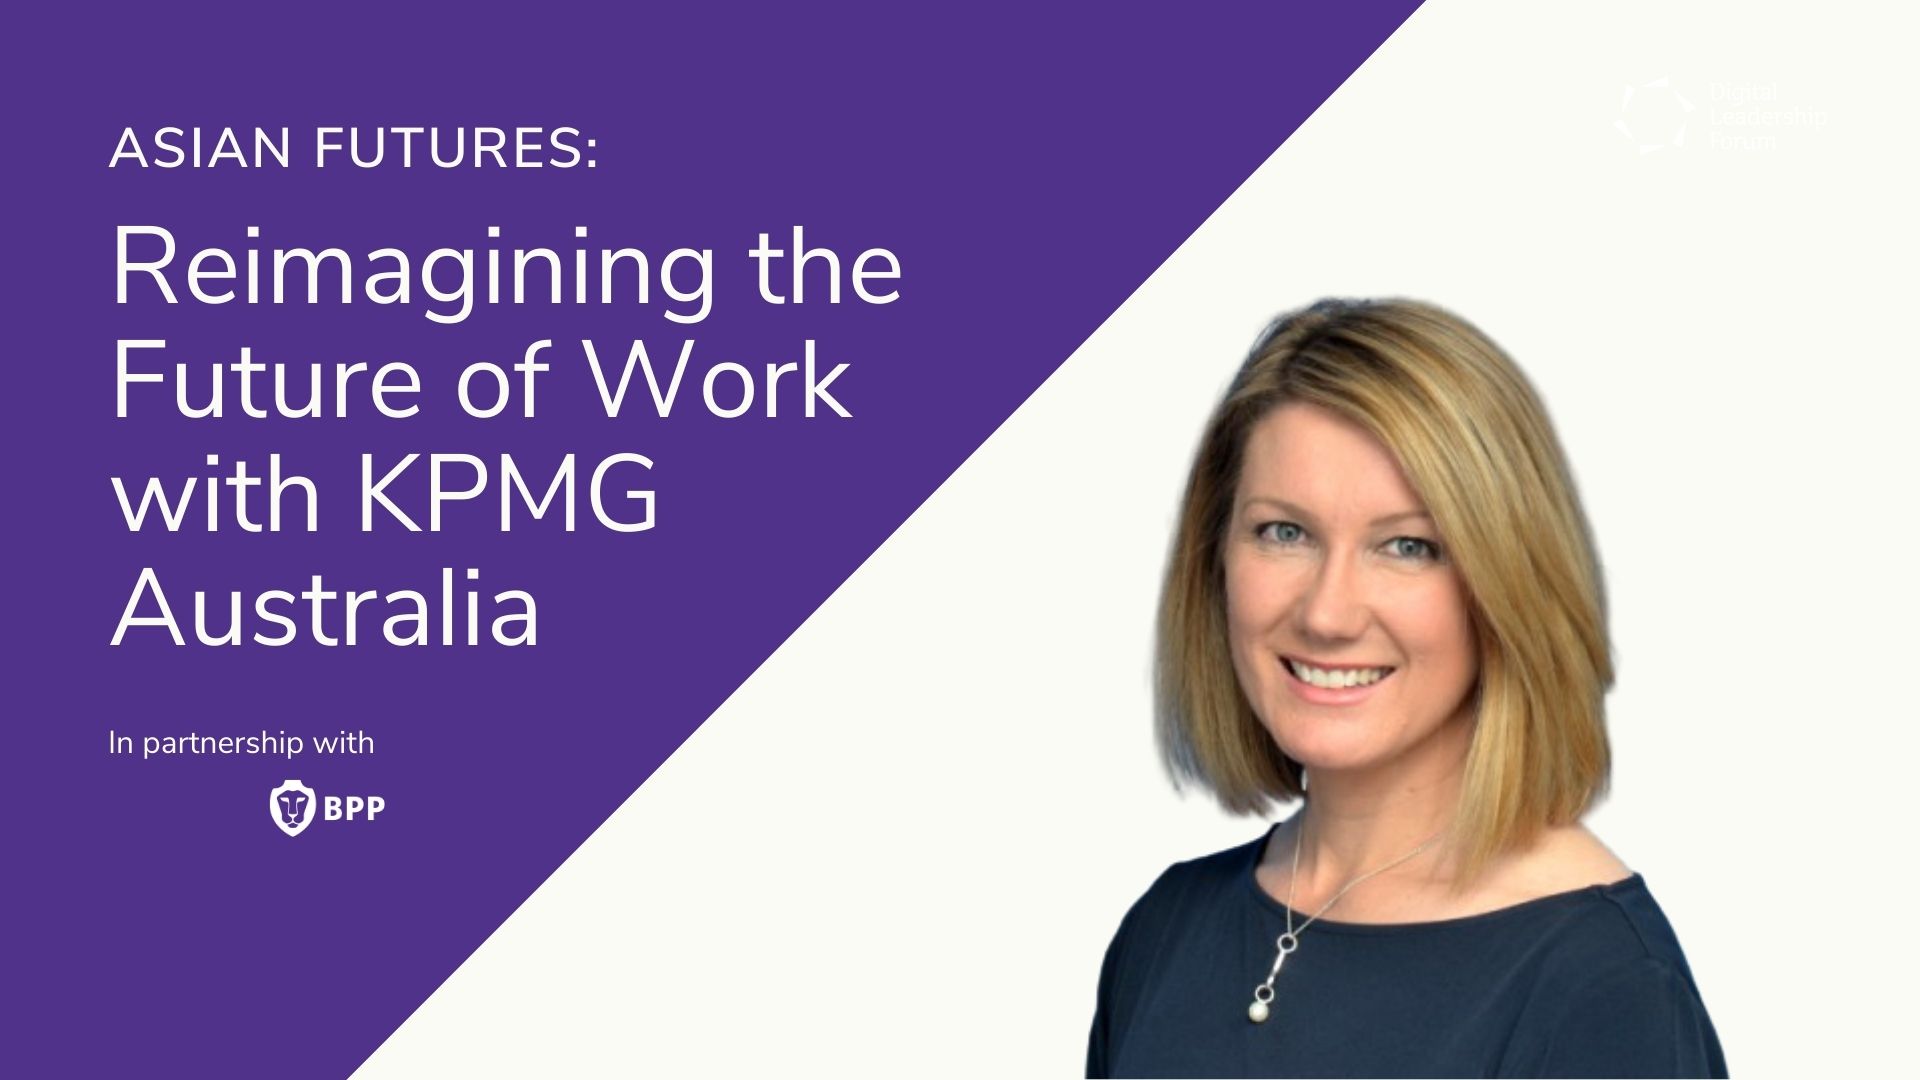 Video: Asian Futures: Reimagining the Future of Work with KPMG Australia